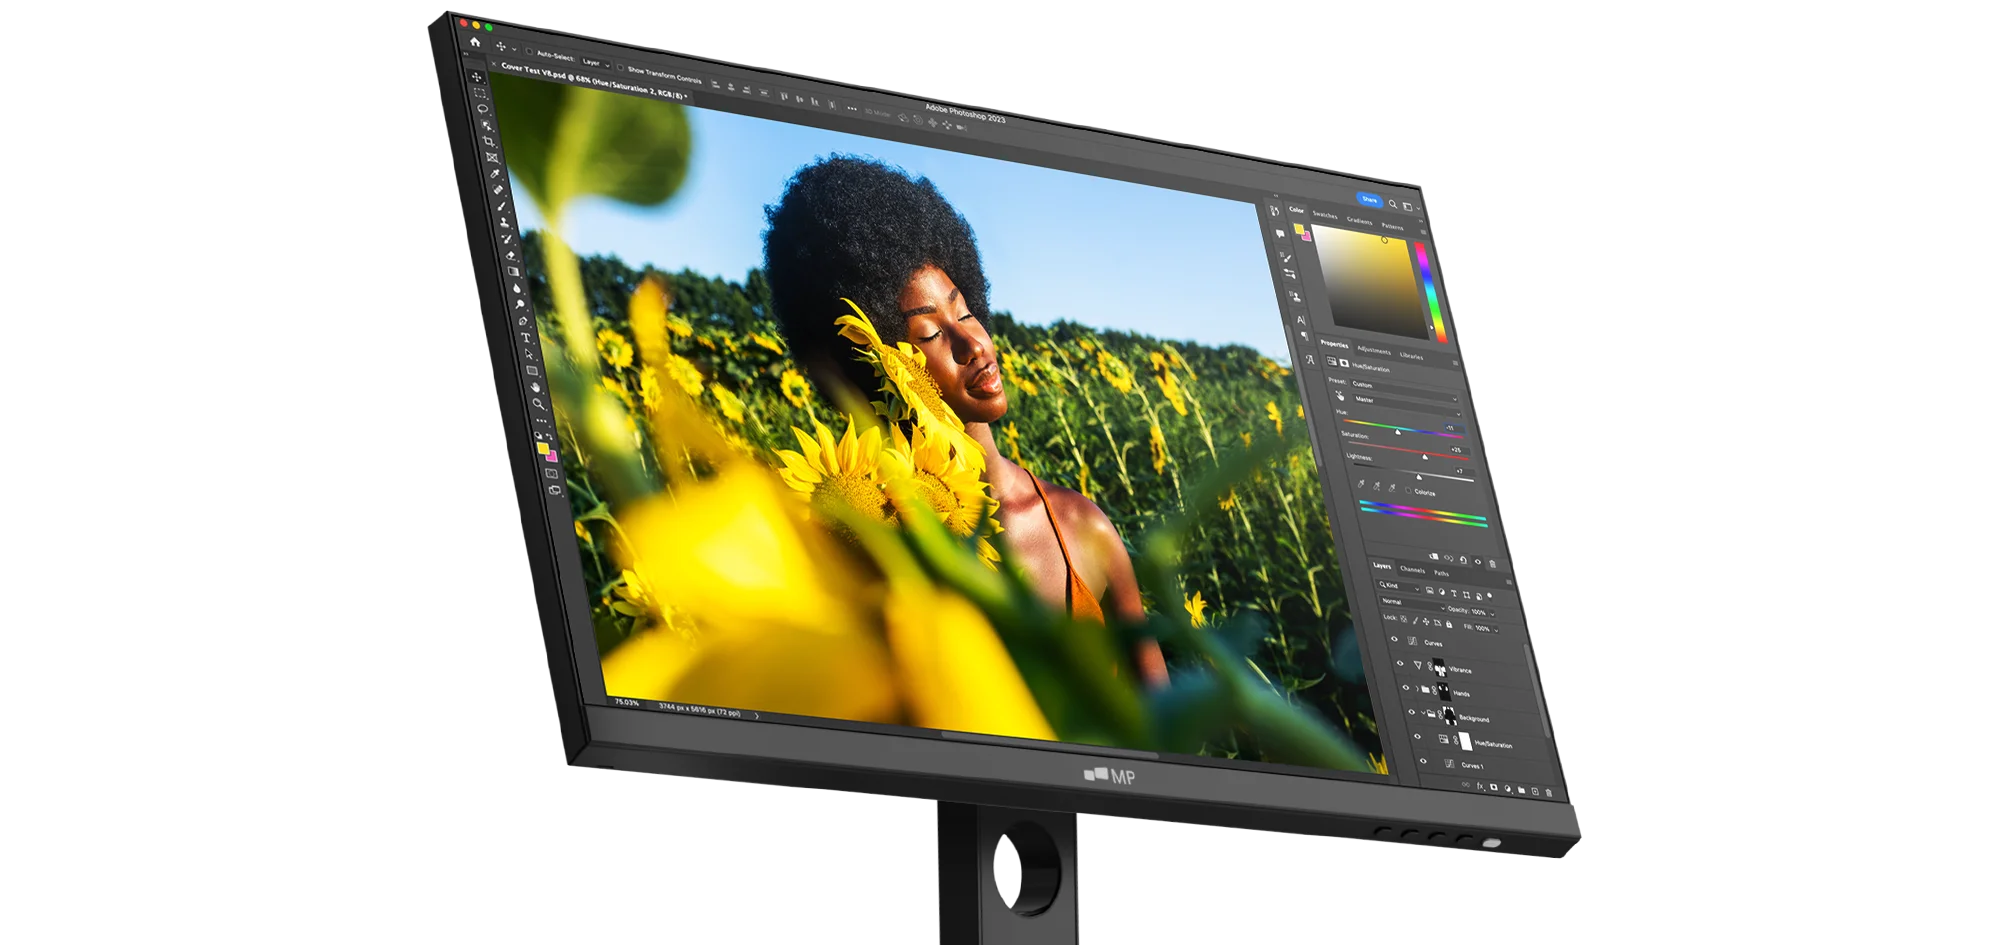 MP 24 inch desktop monitor for photo editing